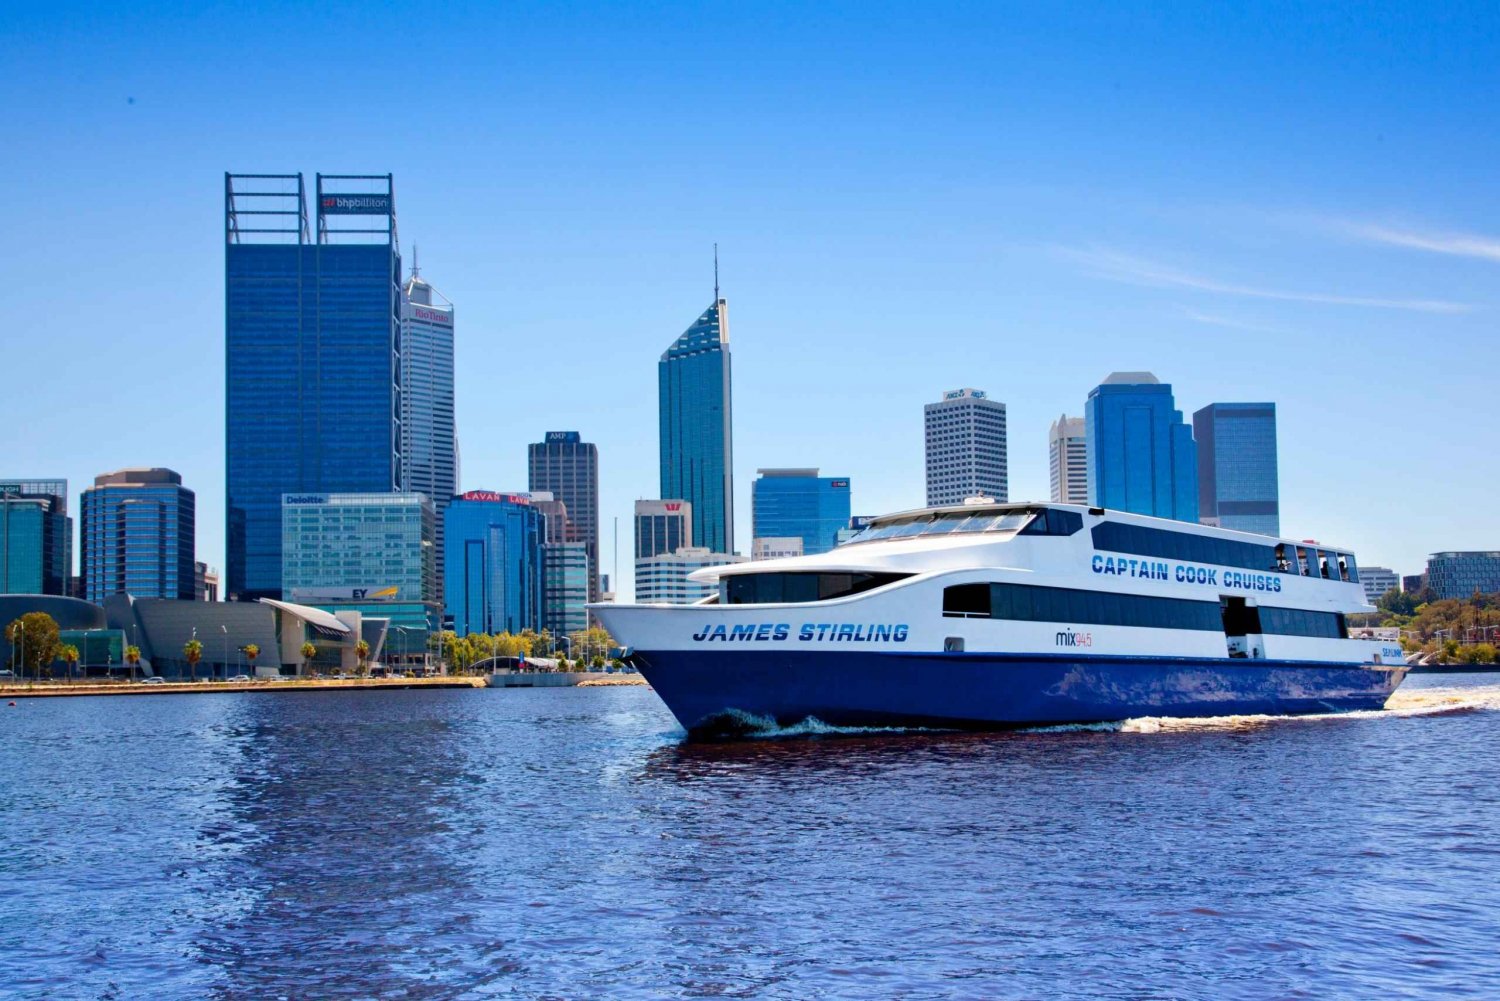 From Perth of Fremantle: Swan River One-Way or Return Cruise